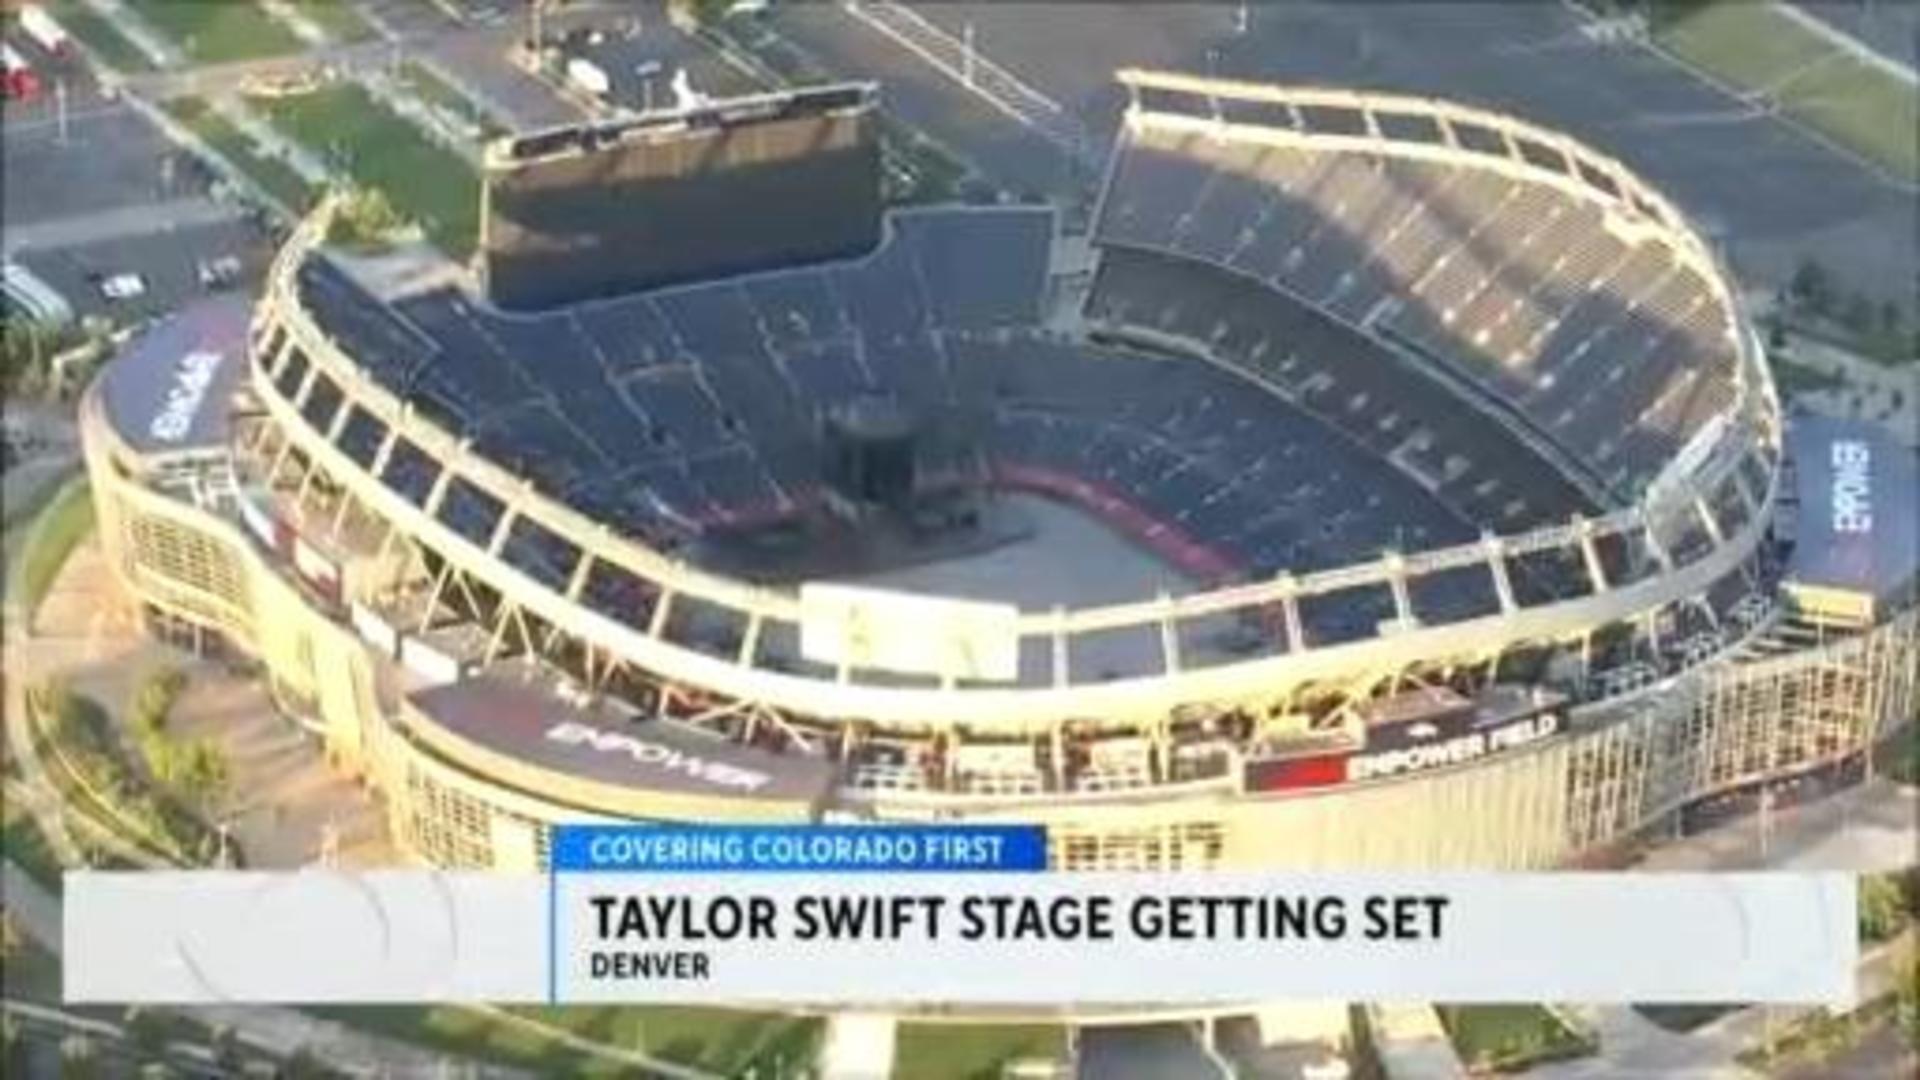 Taylor Swift sells out back-to-back nights at Mile High in Denver